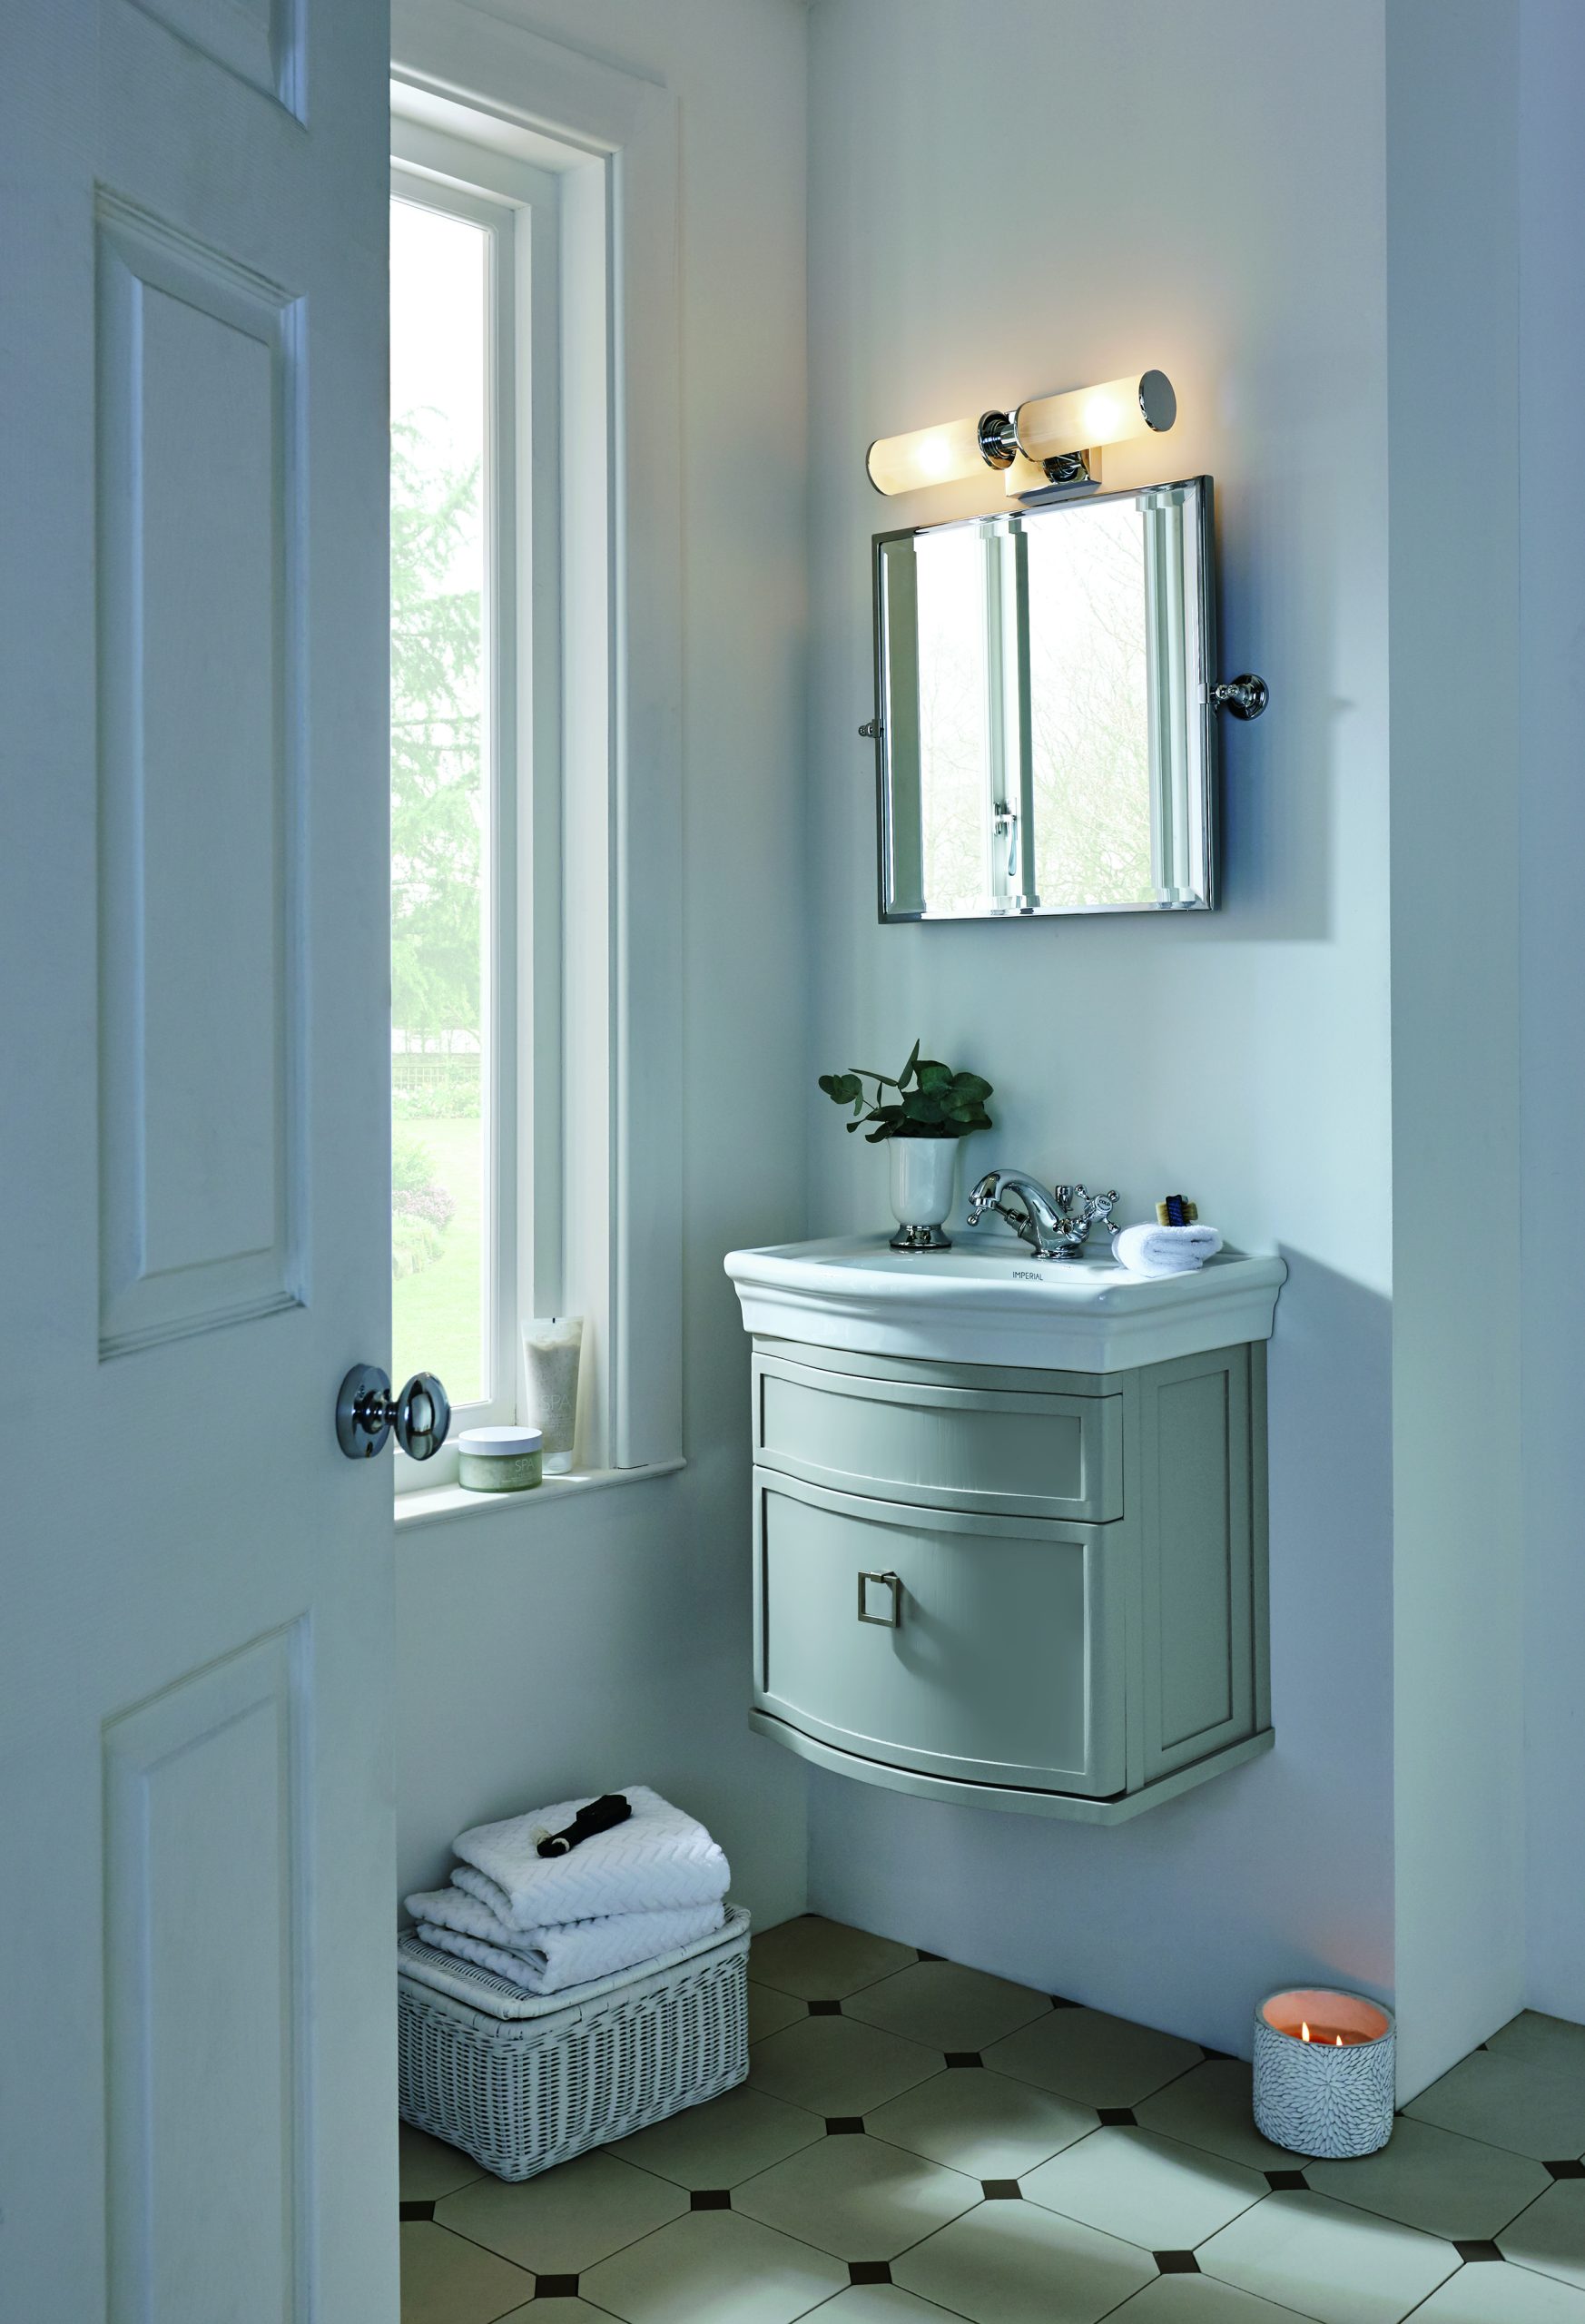 New Etoile Cloak Vanity Unit and Basin by Imperial Bathrooms